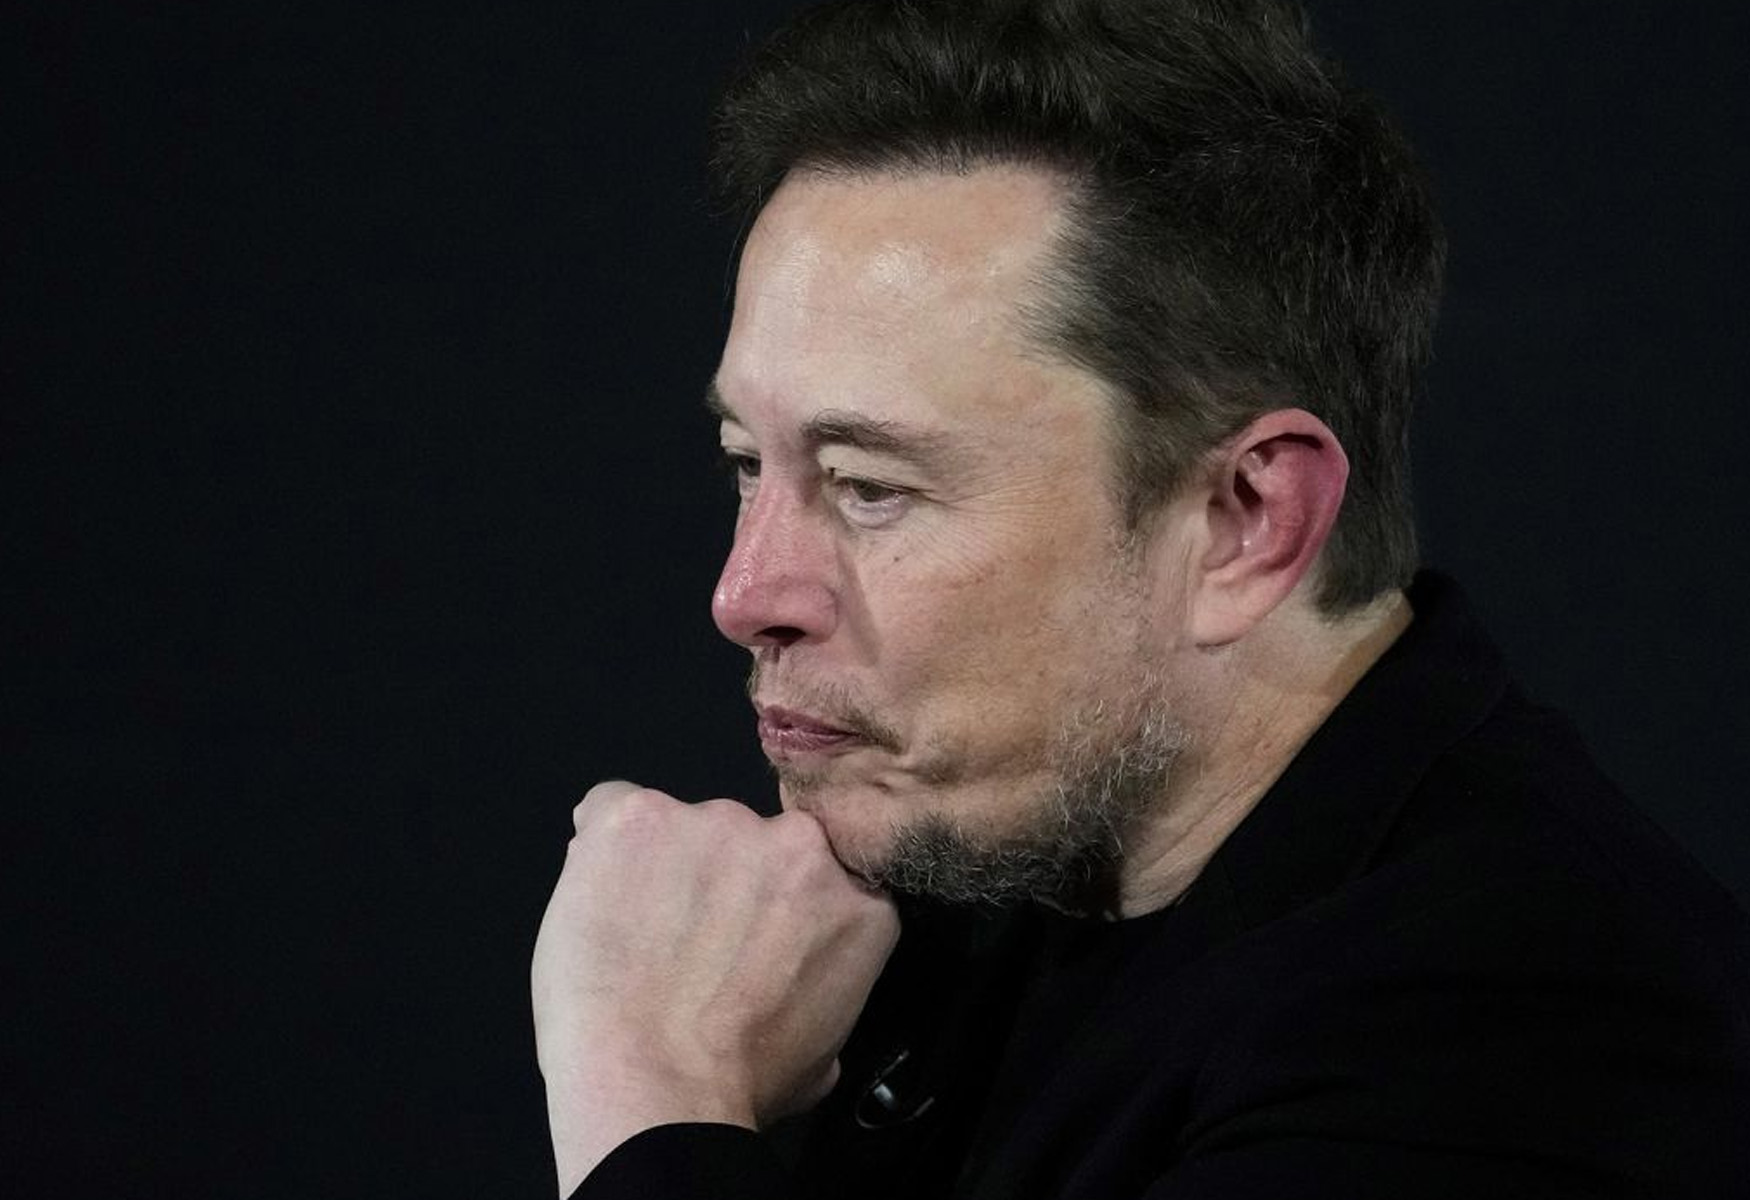 Elon Musk’s Diminishing Influence: The Decline Of A Tech Icon